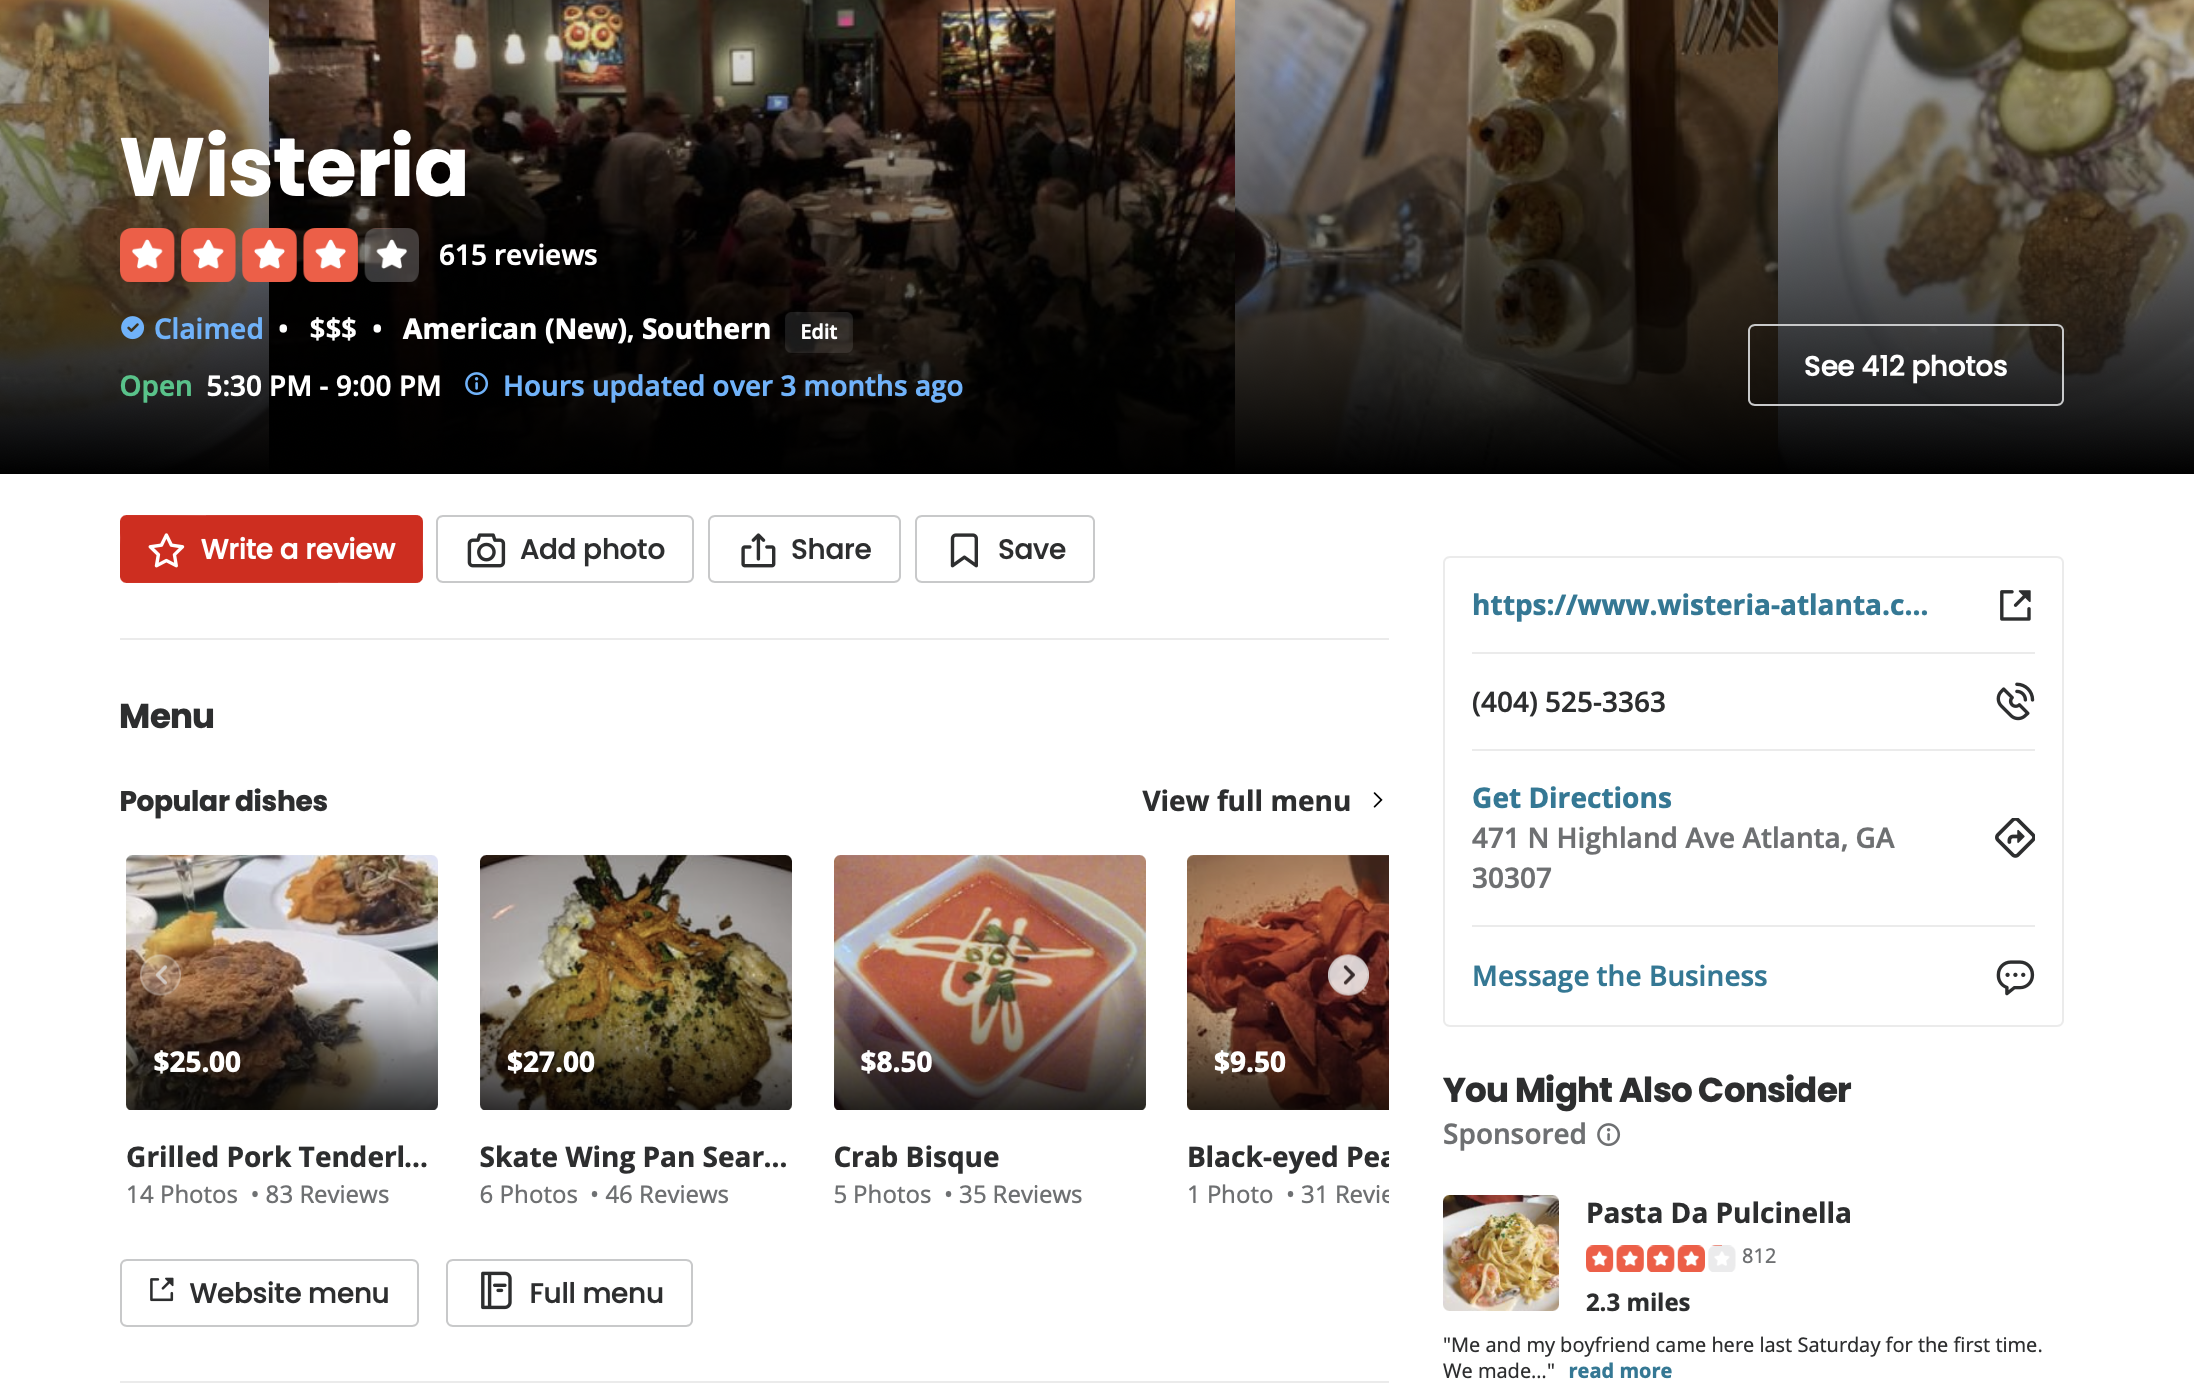 Yelp webpage for Wisteria restaurant, with images of food and different reviews.